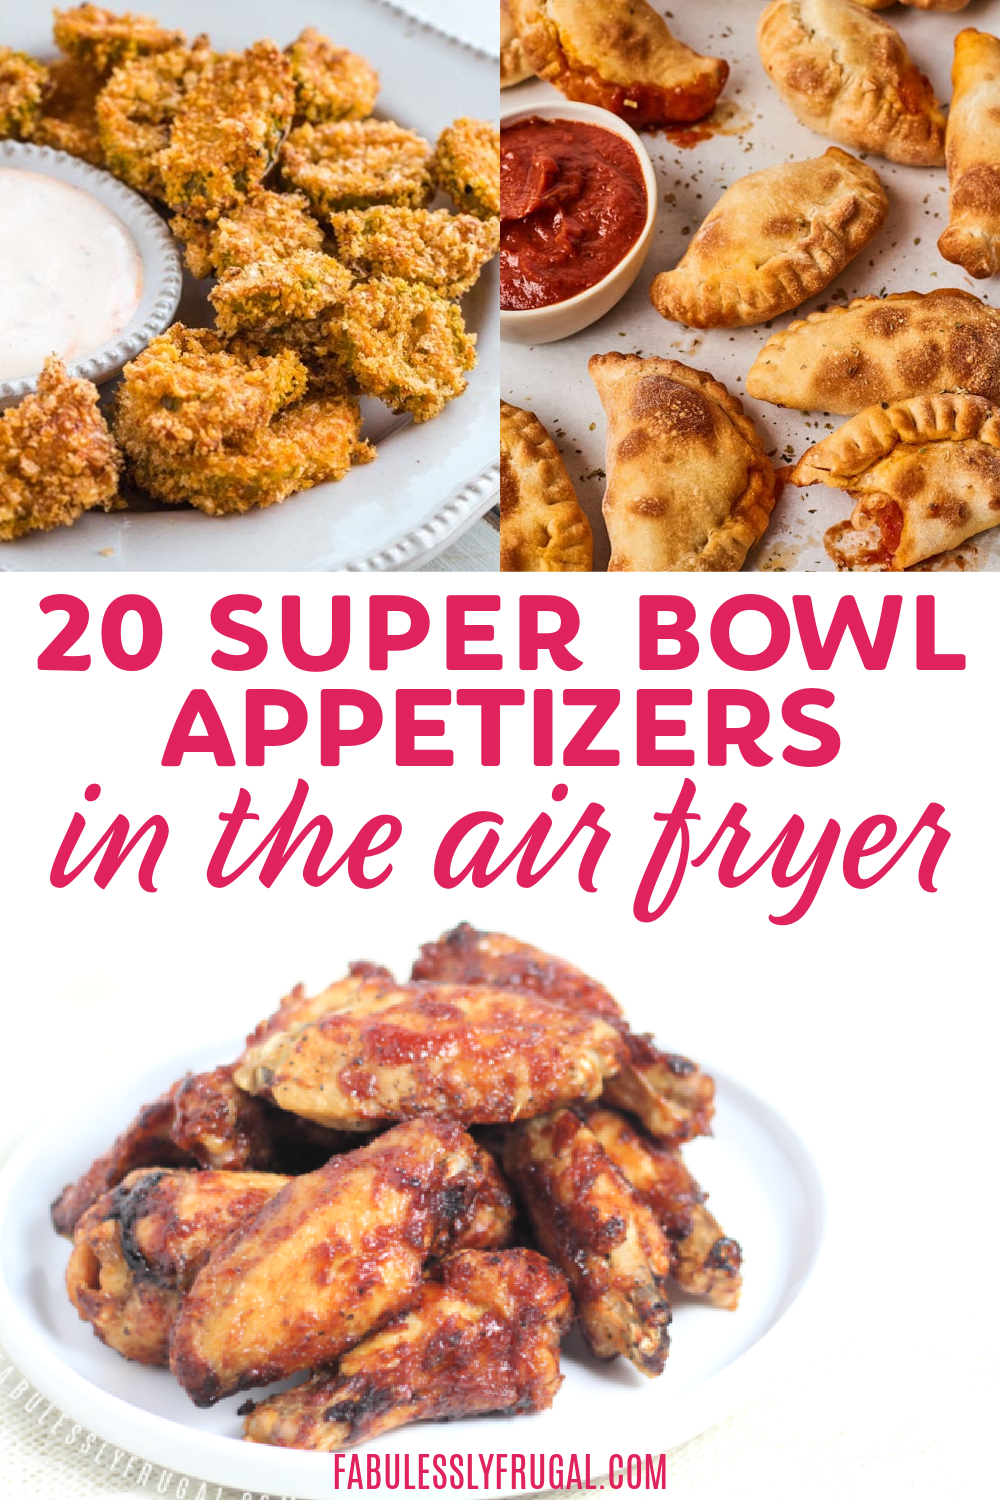 Upgrade your game day with a few of these tasty and easy air fryer appetizers